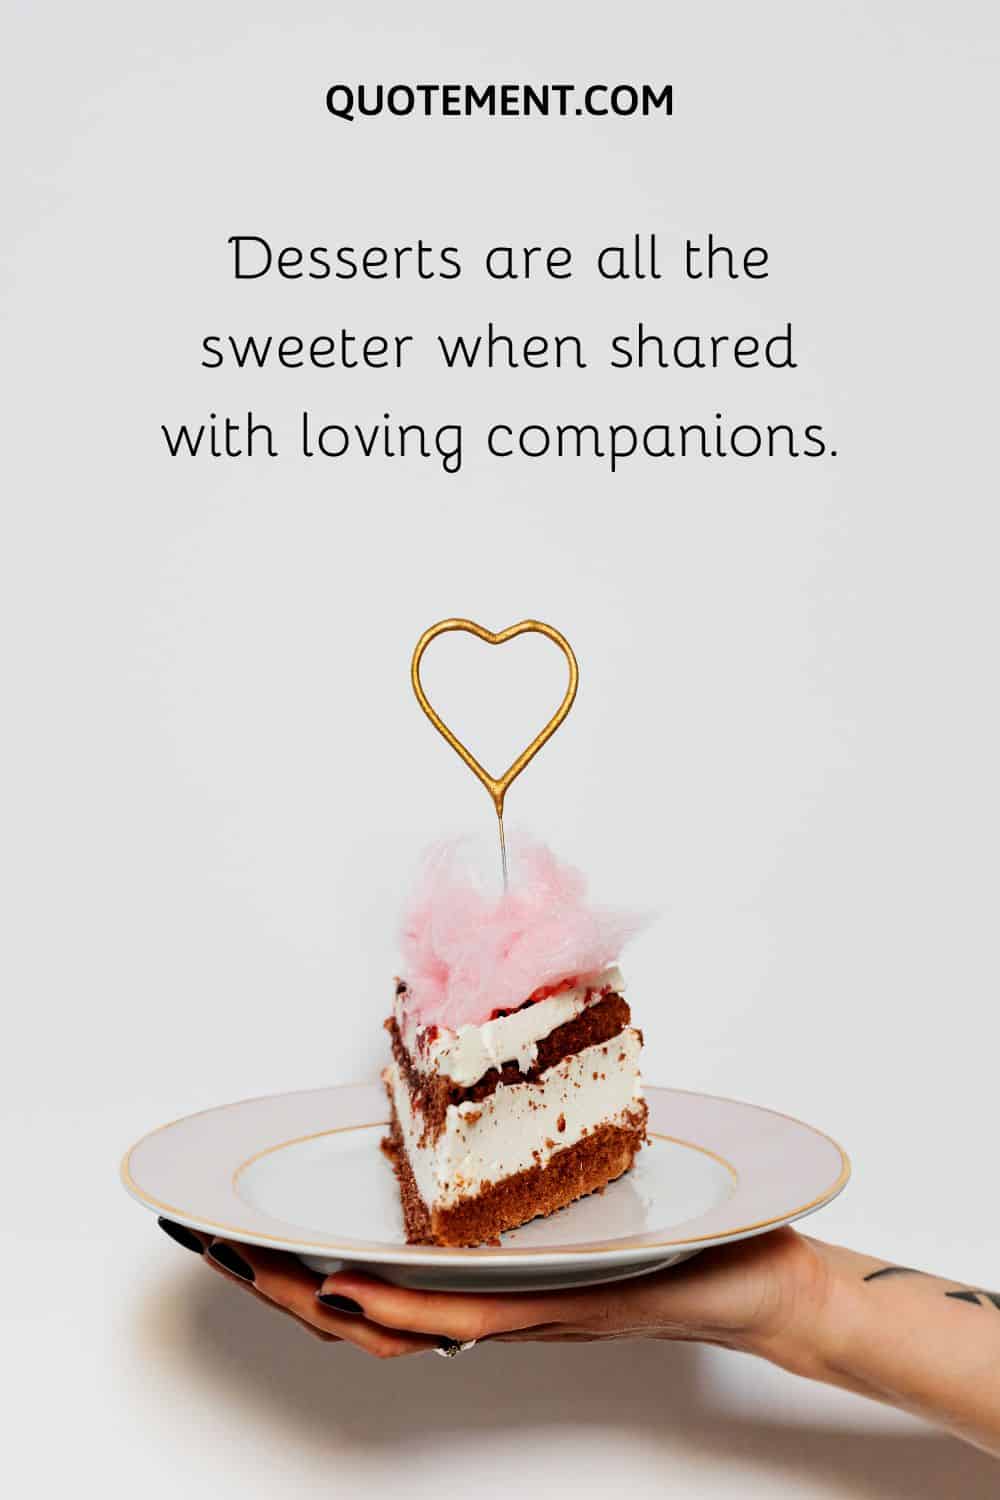 Desserts are all the sweeter when shared with loving companions